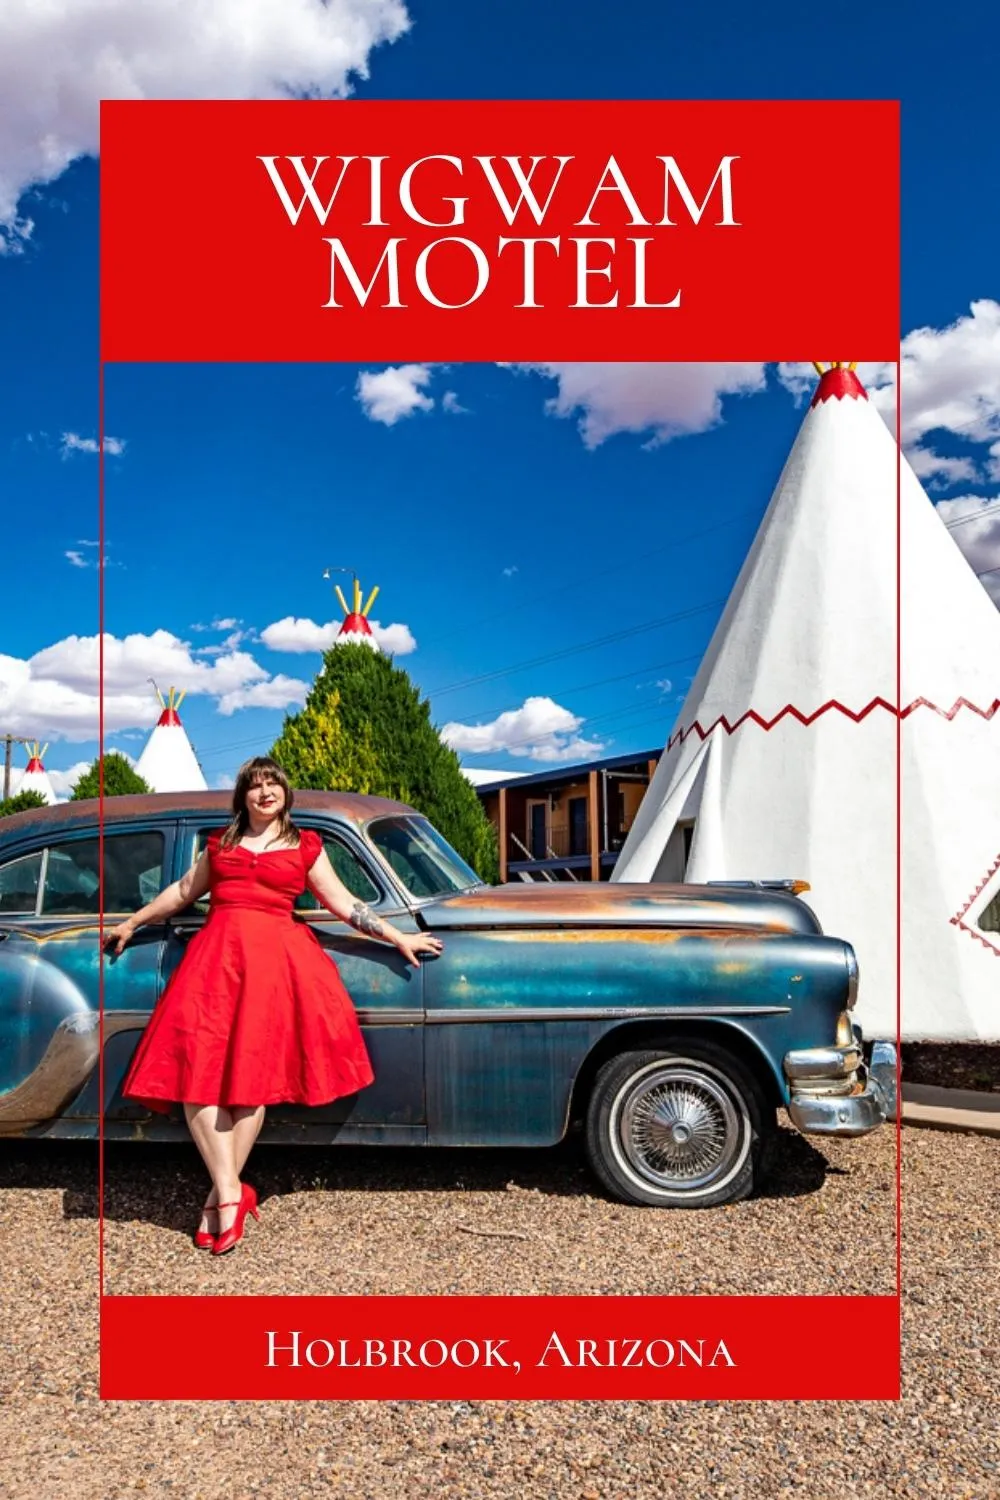 “Have you slept in a Wigwam lately?” This iconic Route 66 motel has been attracting travelers from the road with its unusual architecture since 1950. Spend the night at the Wigwam Motel in Holbrook, Arizona. Also known as Wigwam Village No. 6. Visit this unique Route 66 Motel on your Arizona road trip. It's a fun roadside attraction for your travel itinerary. #Route66 #Route66RoadTrip #RoadTrip #Arizona #ArizonaRoute66 #ArizonaRoadTrip #RoadsideAttractions #RoadsideAttraction #RoadsideAmerica